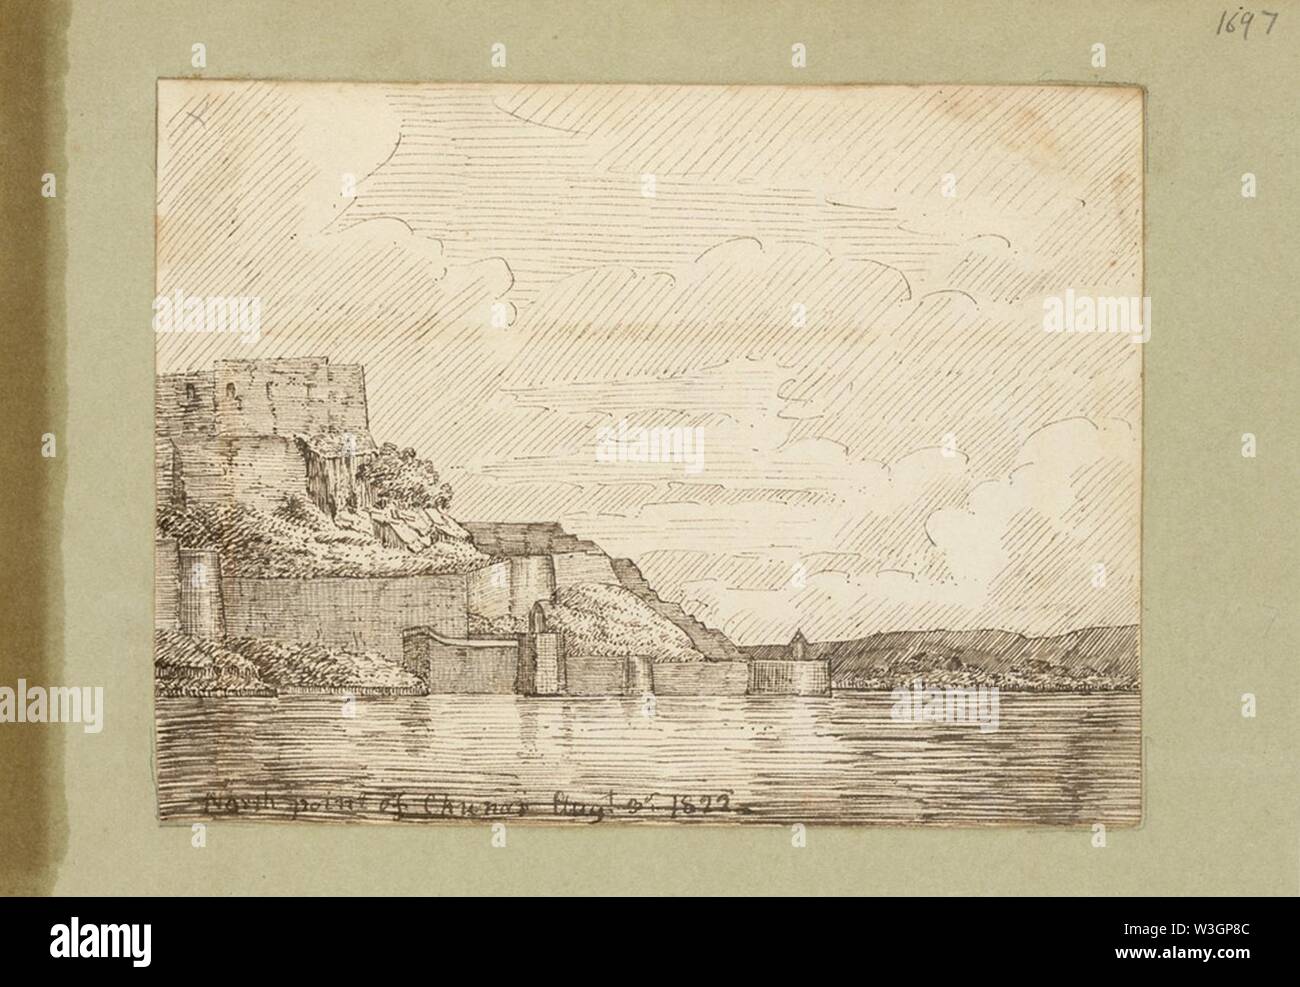 Chunar Fort on the Ganges (U.P.). 3 August 1822. Stock Photo